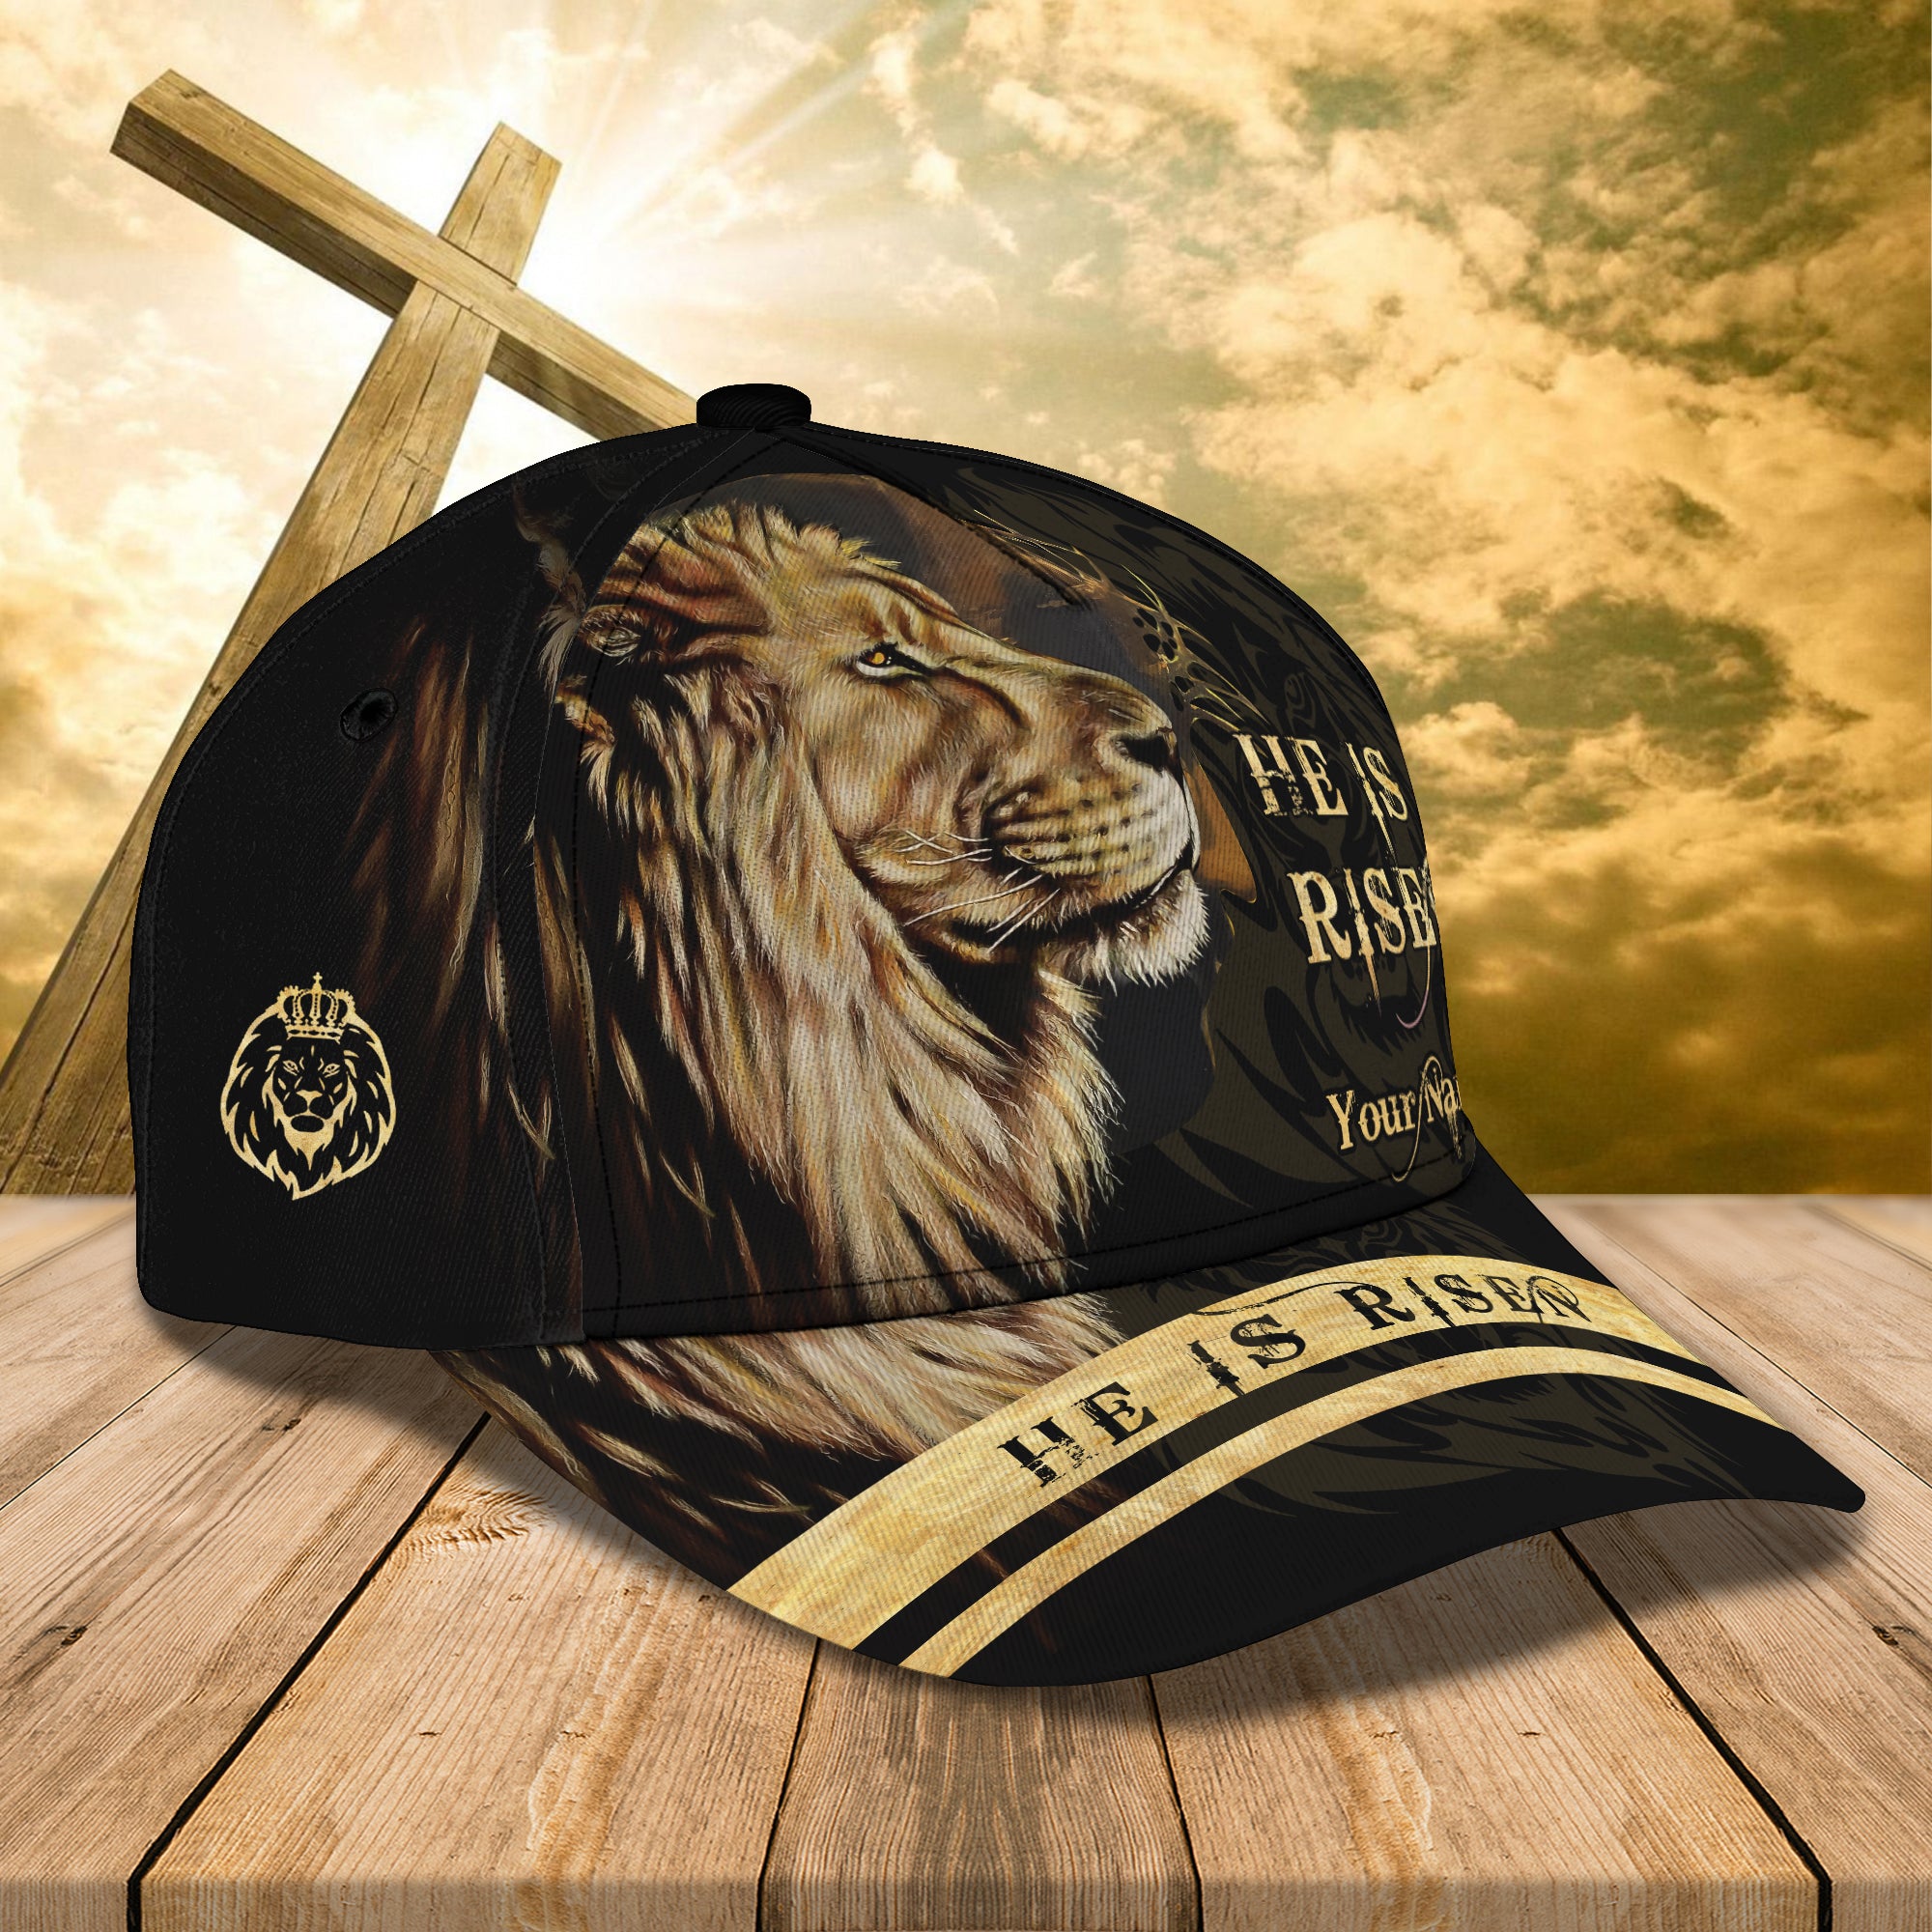 He Is Risen - Personalized Name Cap 48 - Bhn97